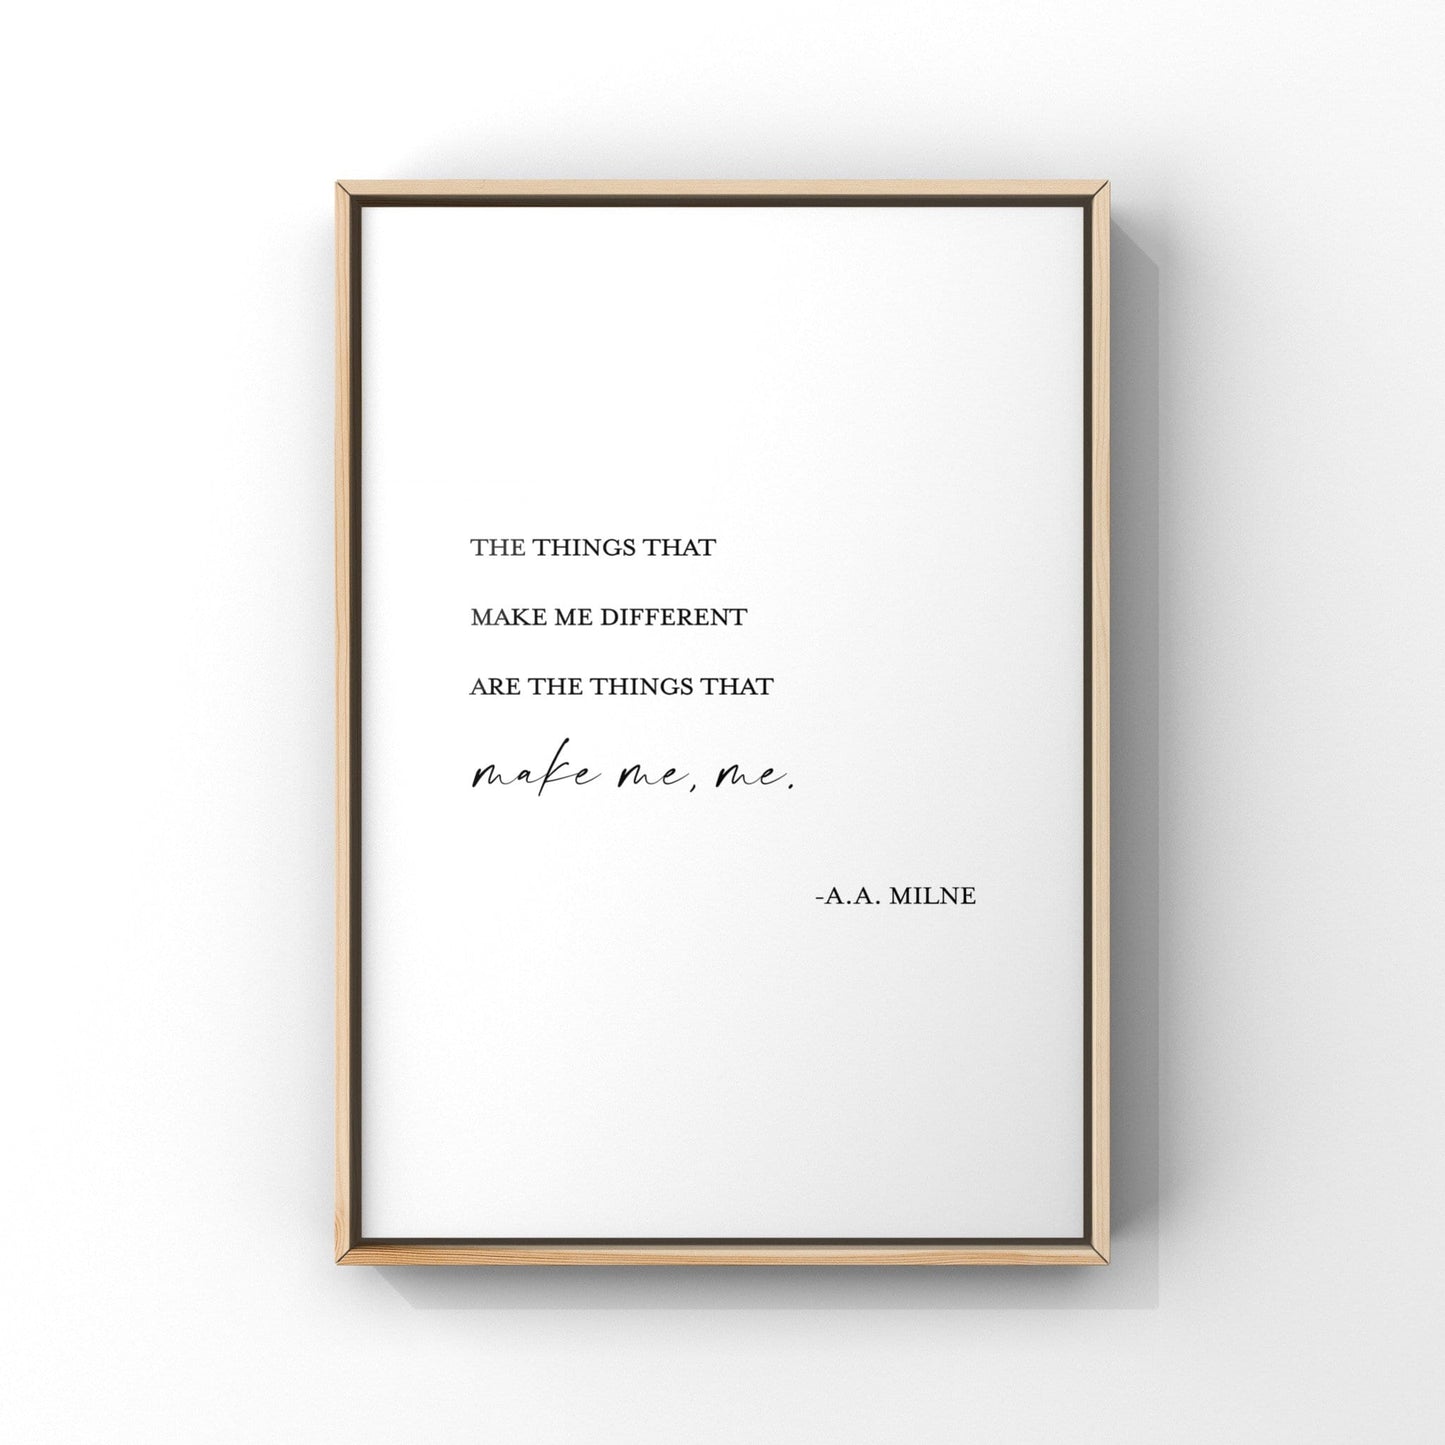 The things that make me different,AA Milne print,Winnie the Pooh,Wall art print,Inspirational quote print,Nursery decor,Kids wall art